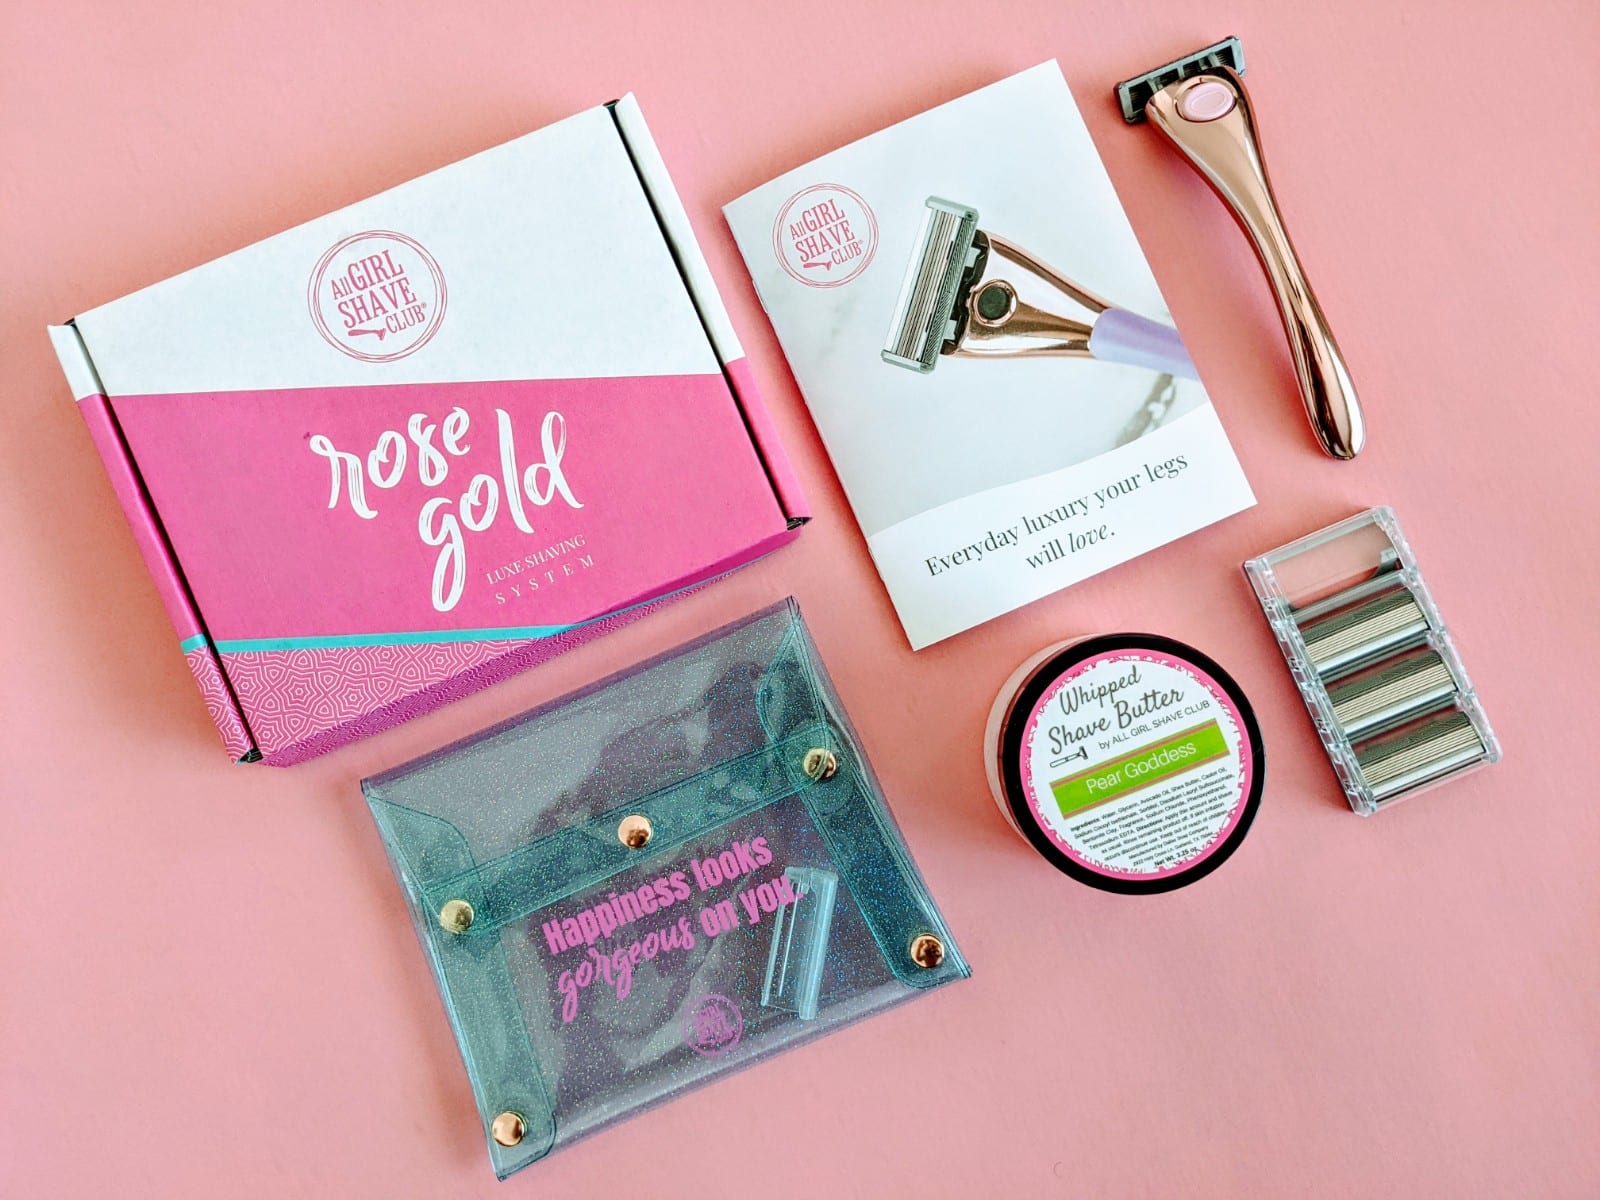 All Girl Shave Club: Rose Gold Luxe Sample Pack Review